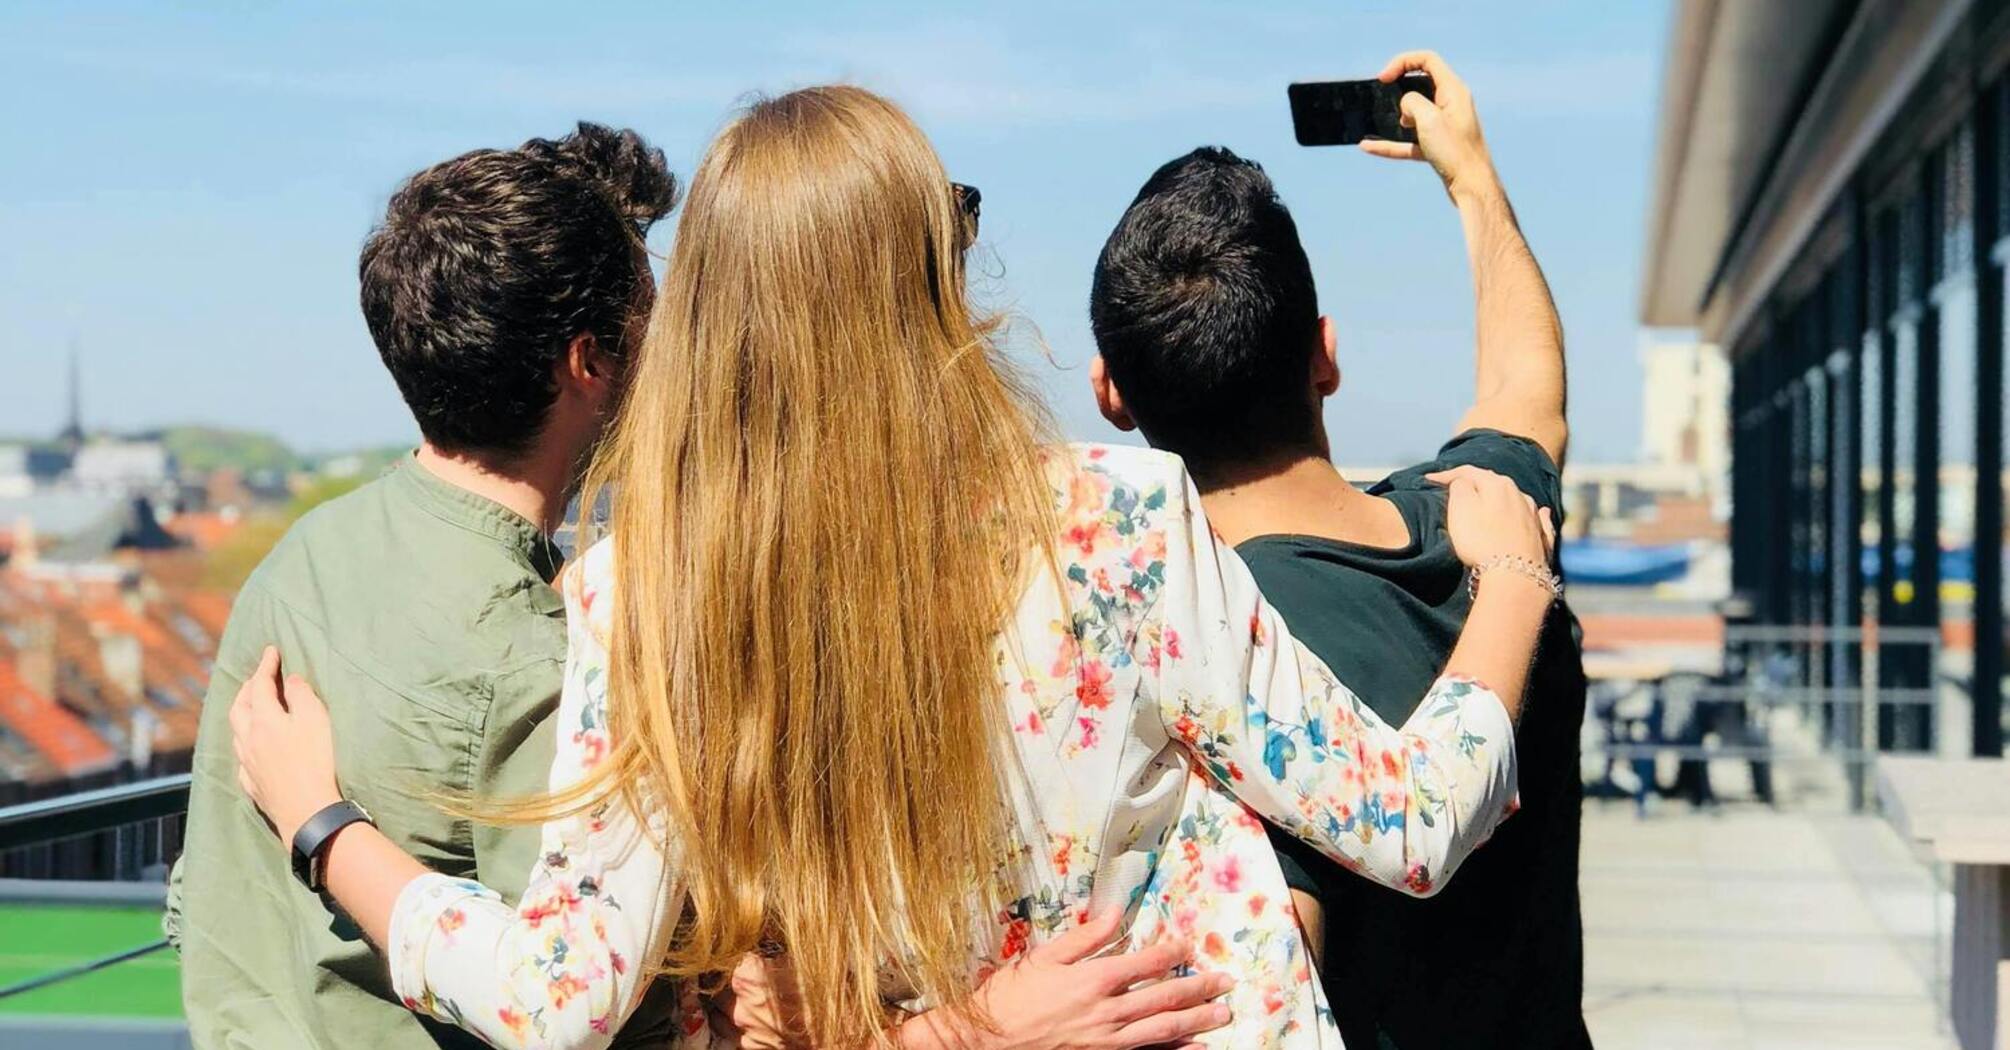 In a popular European city, people are not accustomed to taking selfies, and here's why